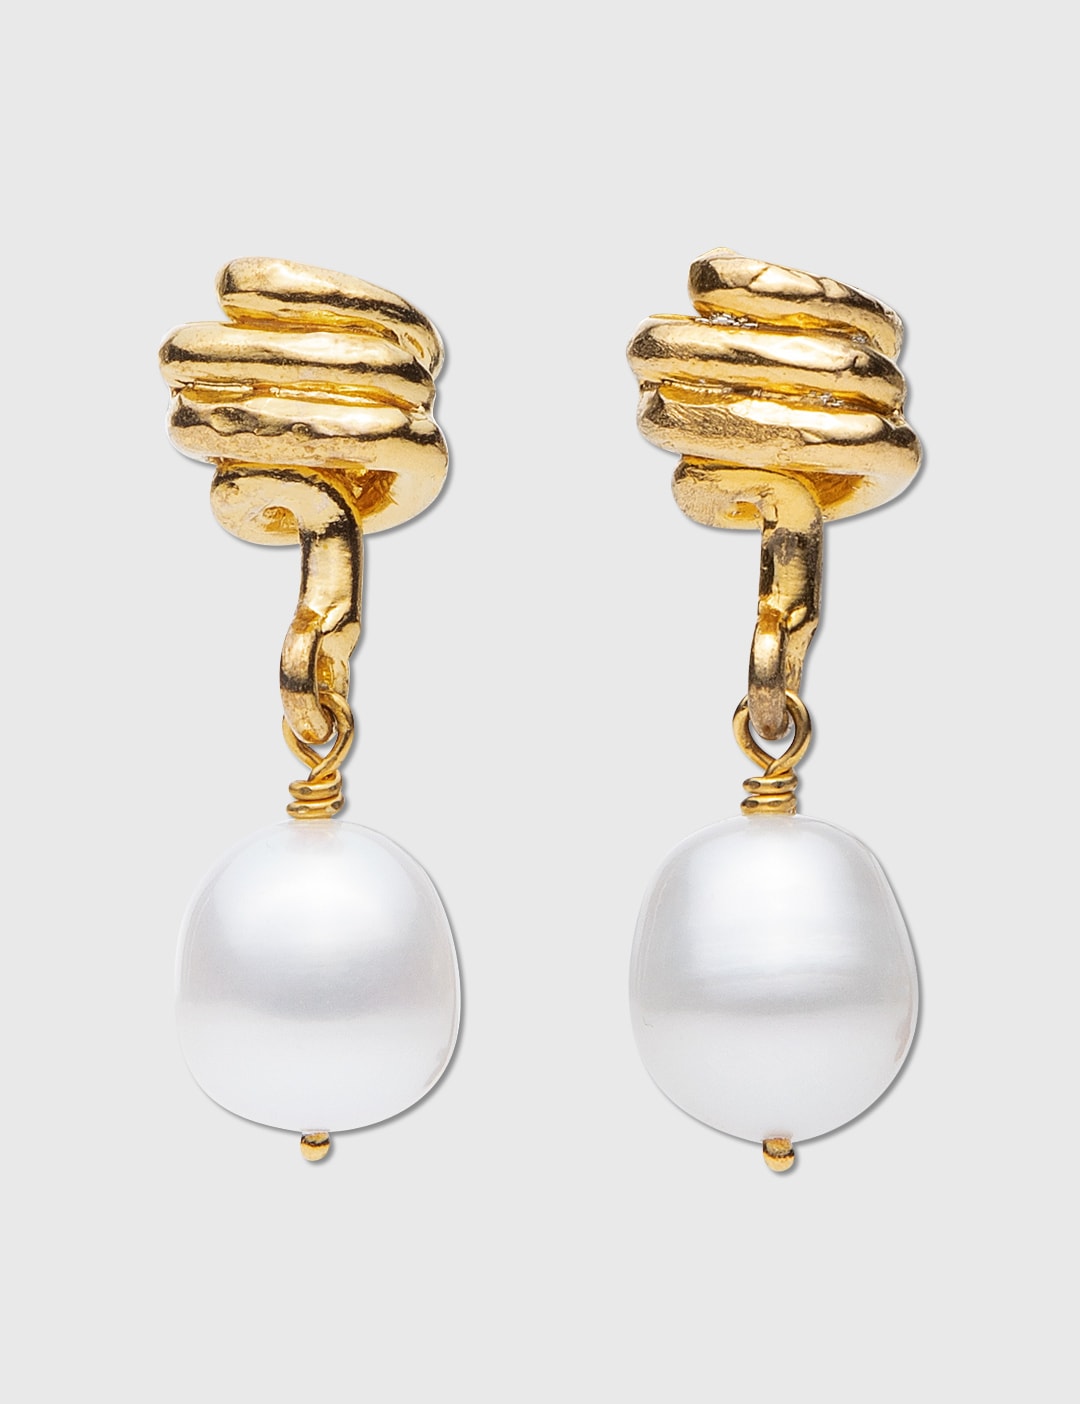 THE CELESTIAL RAINDROP PEARL EARRINGS Placeholder Image